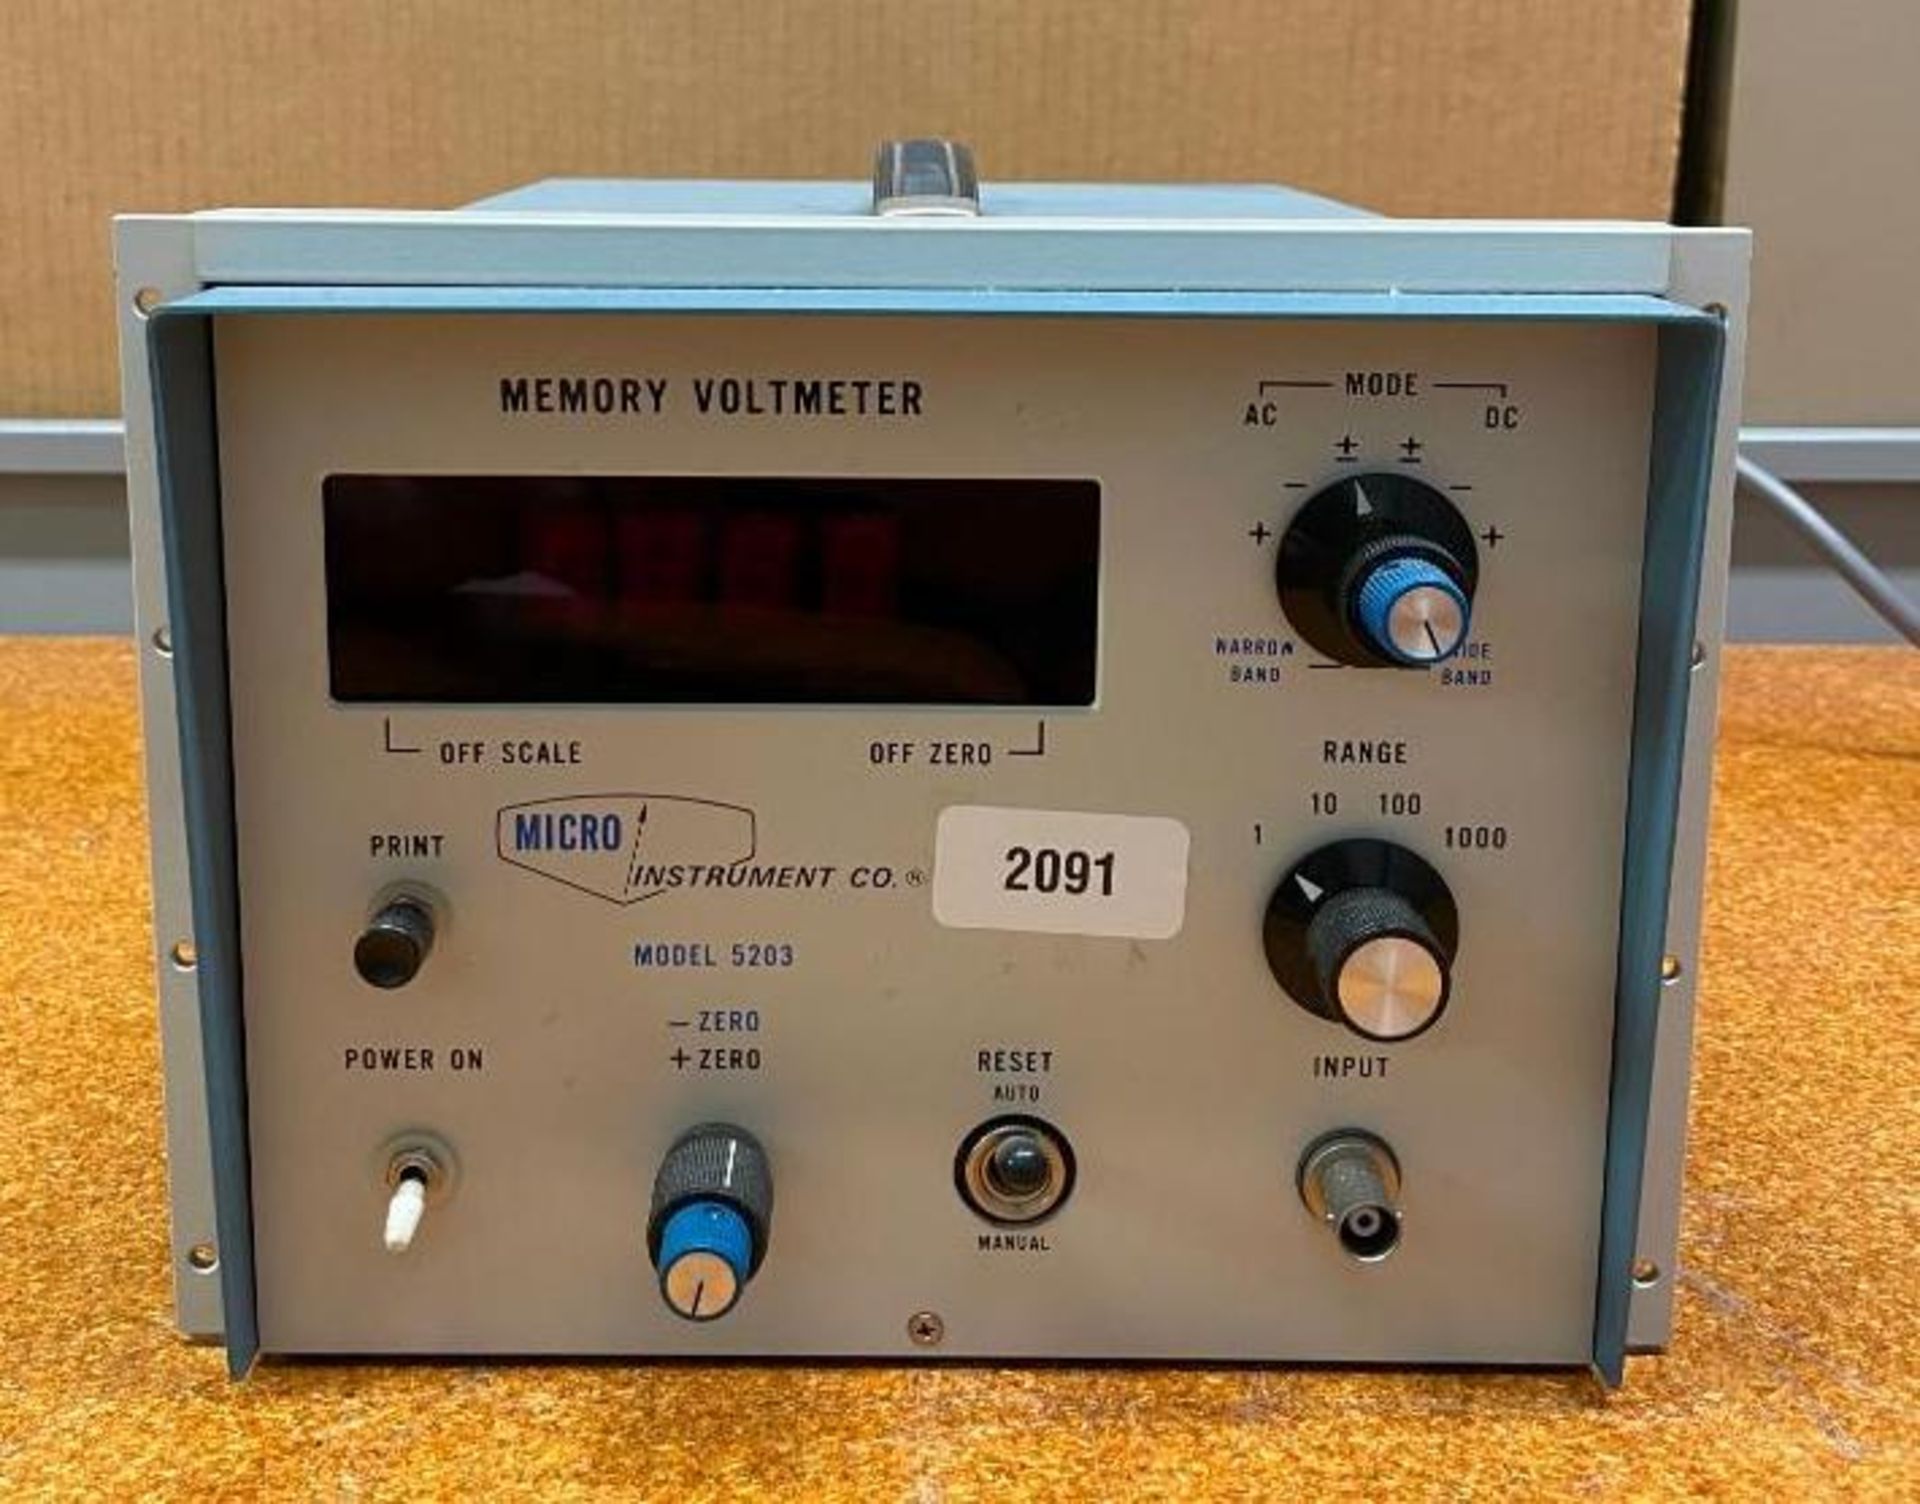 MEMORY VOLTMETER TO RECORD AC OR DC VOLTAGES BRAND/MODEL: MICRO INSTRUMENT COL. 5203 INFORMATION: GA